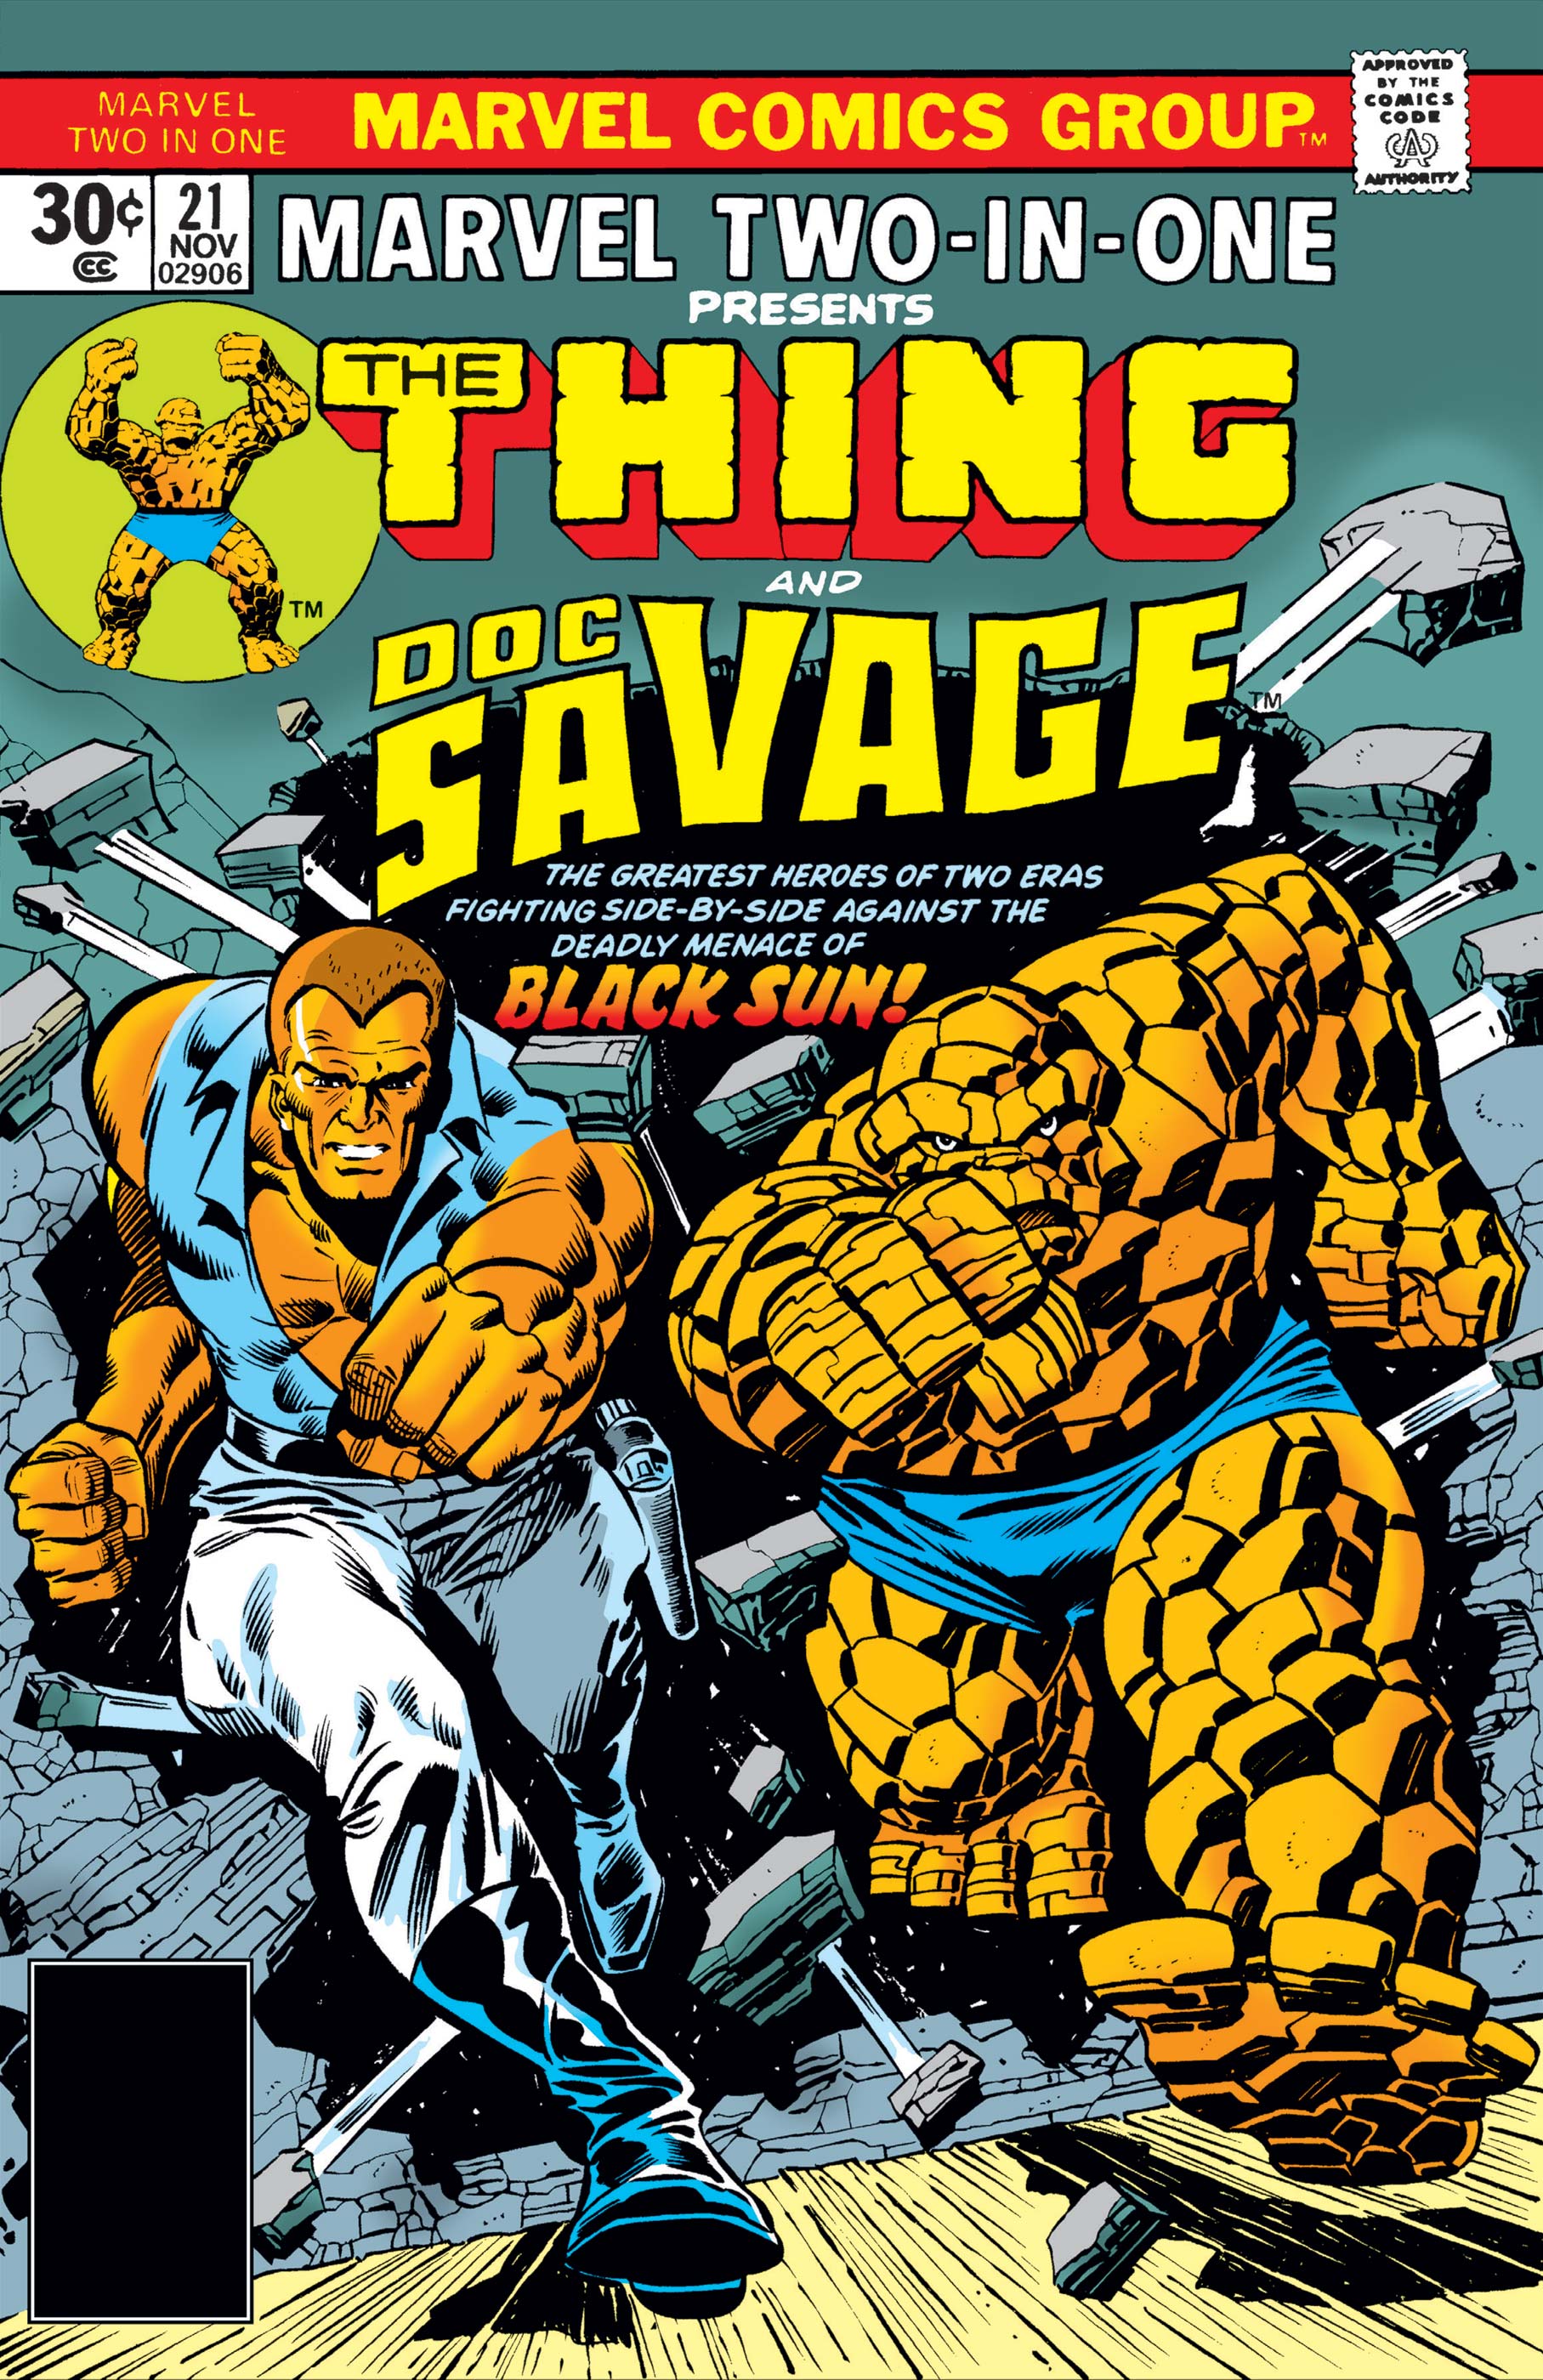 Marvel Two-in-One (1974) #21